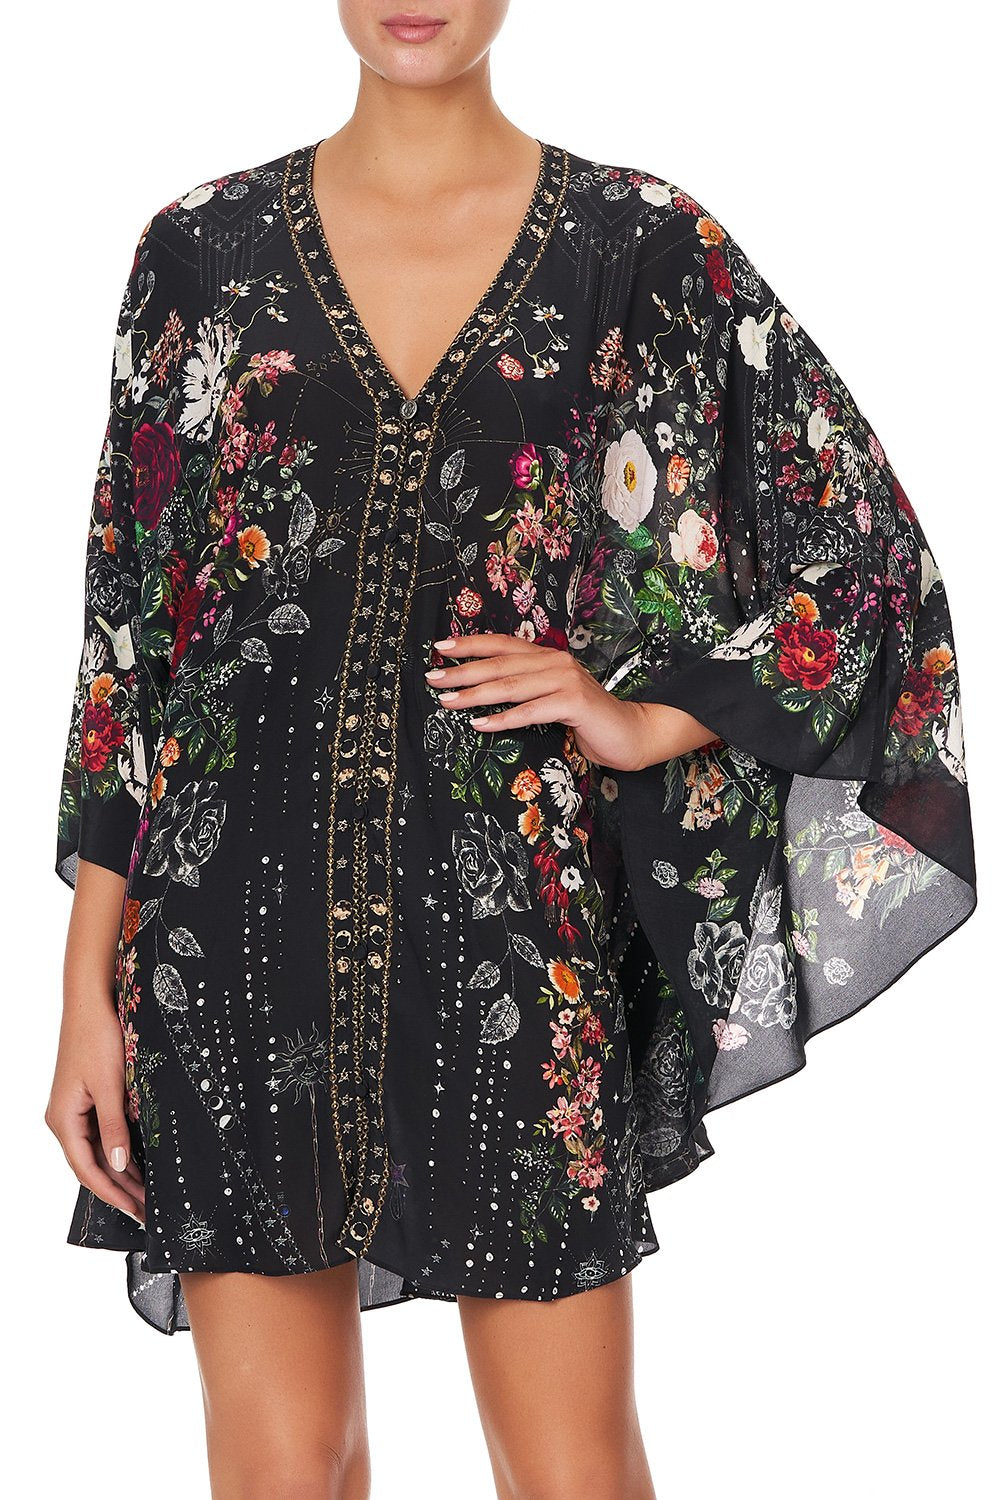 BUTTON UP KAFTAN WITH BELT TO THE GYPSY